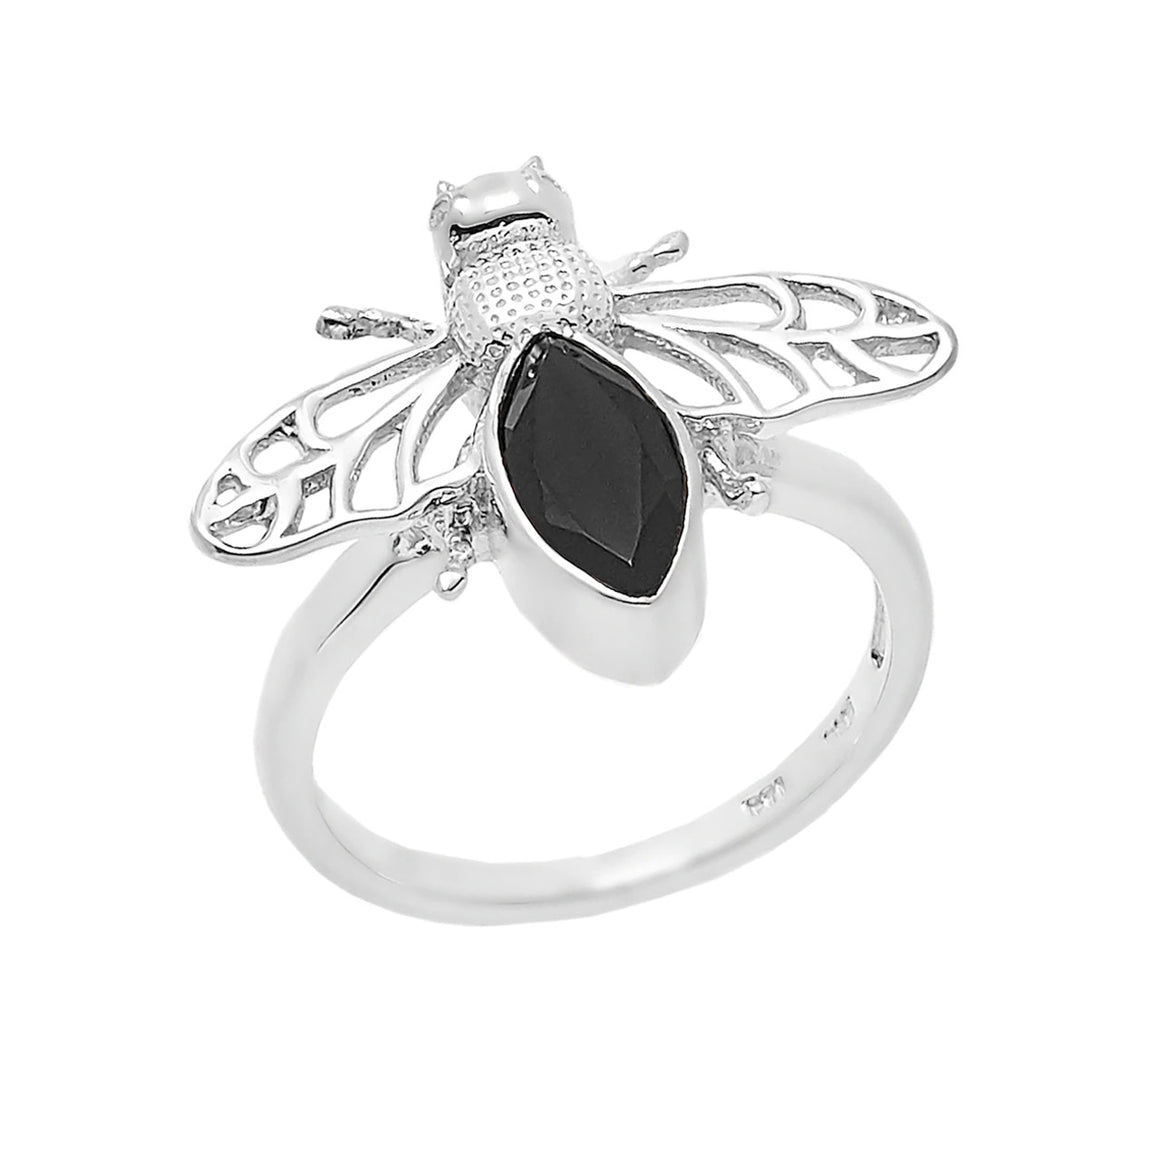 Black Spinel Bumble Bee Ring